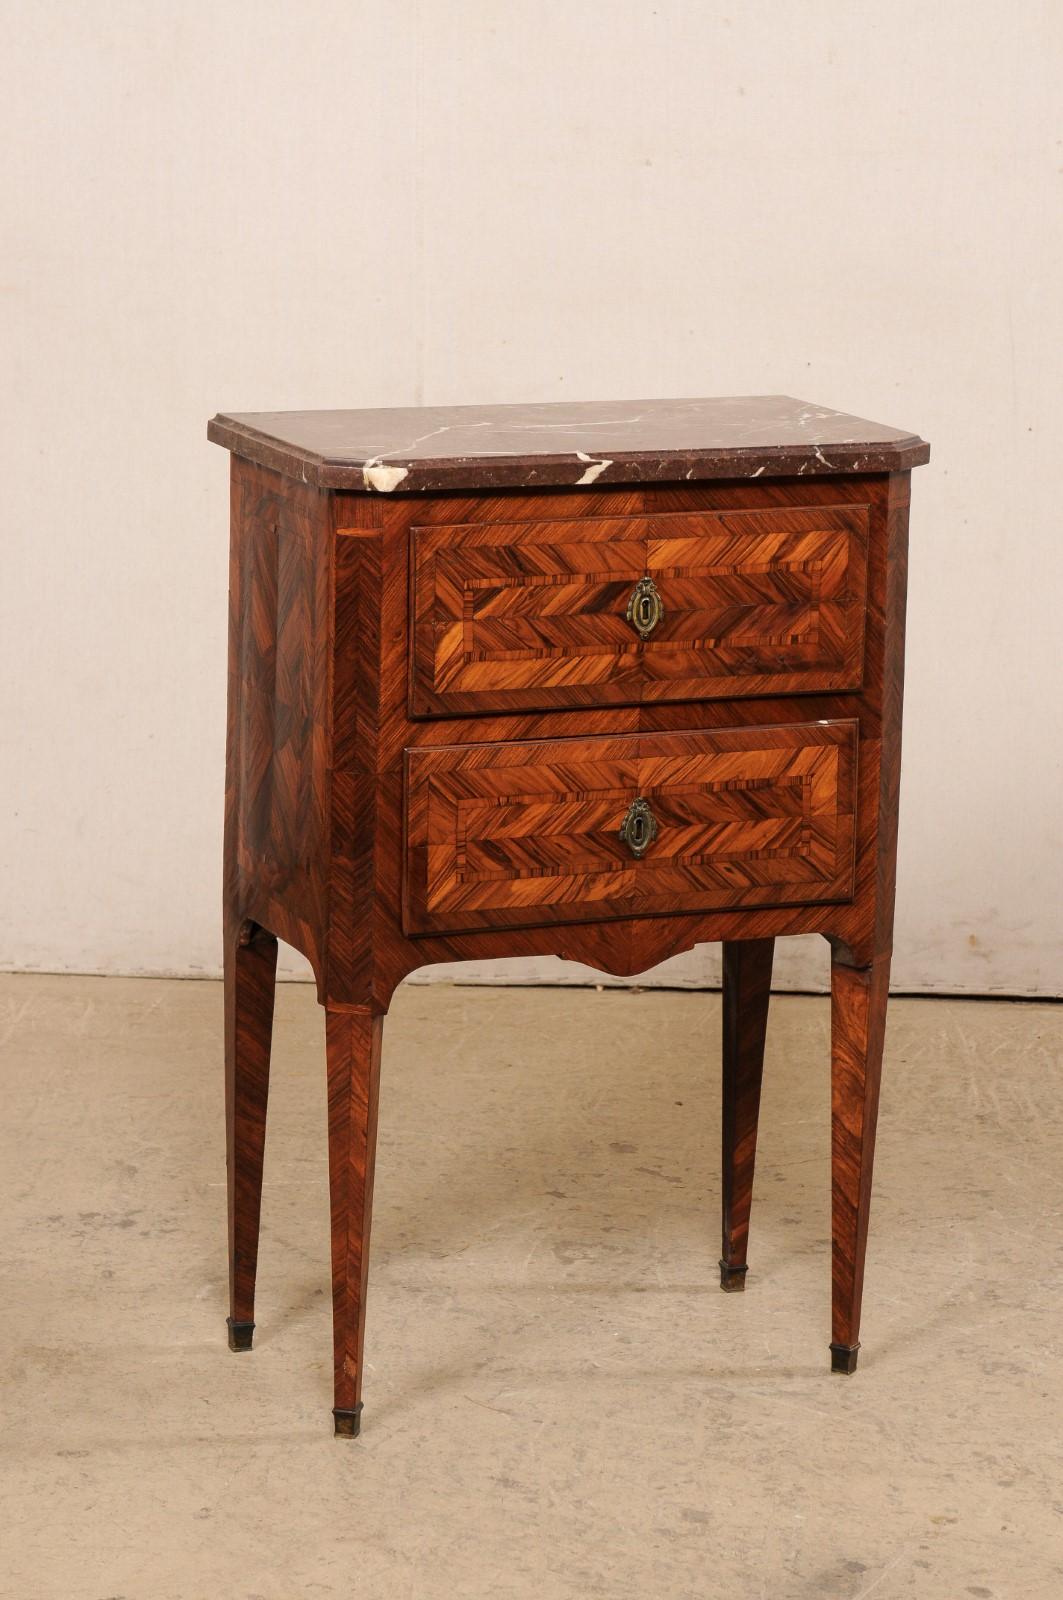 An Italian tall comodino, with original marble top and gorgeous veneer & inlays, from the 19th century. This antique side chest from Italy features its original marble top with canted front corners, atop a case two drawer case adorn with great inlay